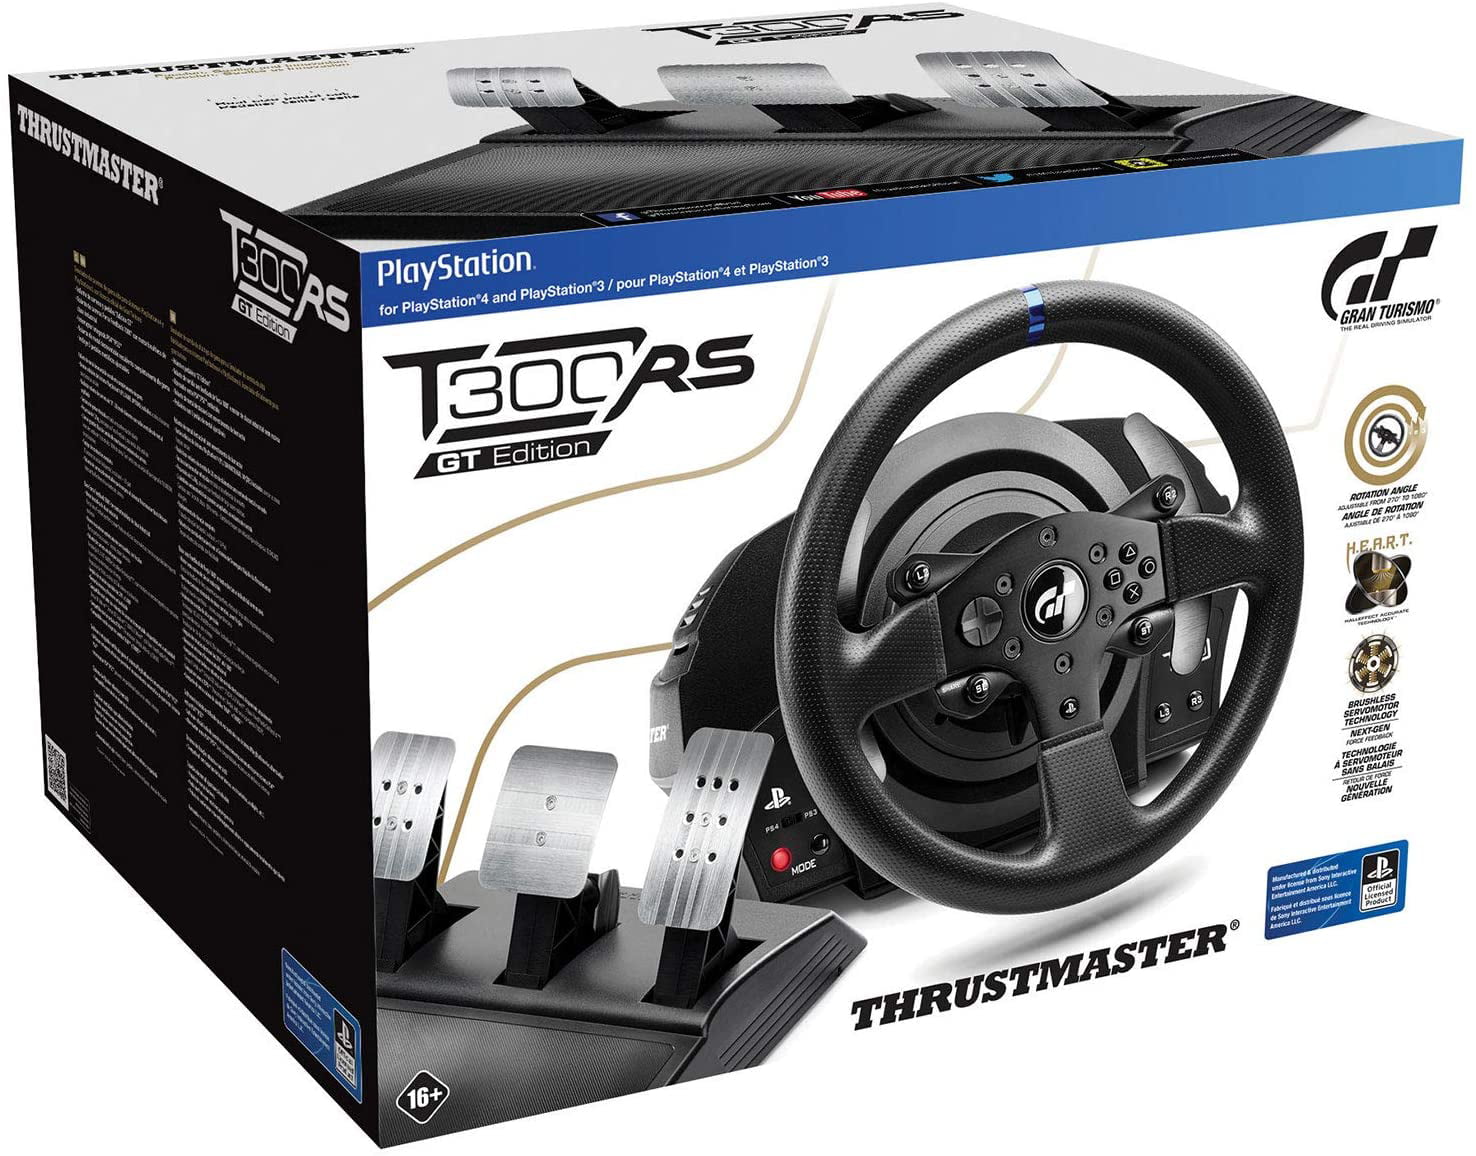 Thrustmaster T300 RS GT Racing Wheel for PS4 and PC - Walmart.com